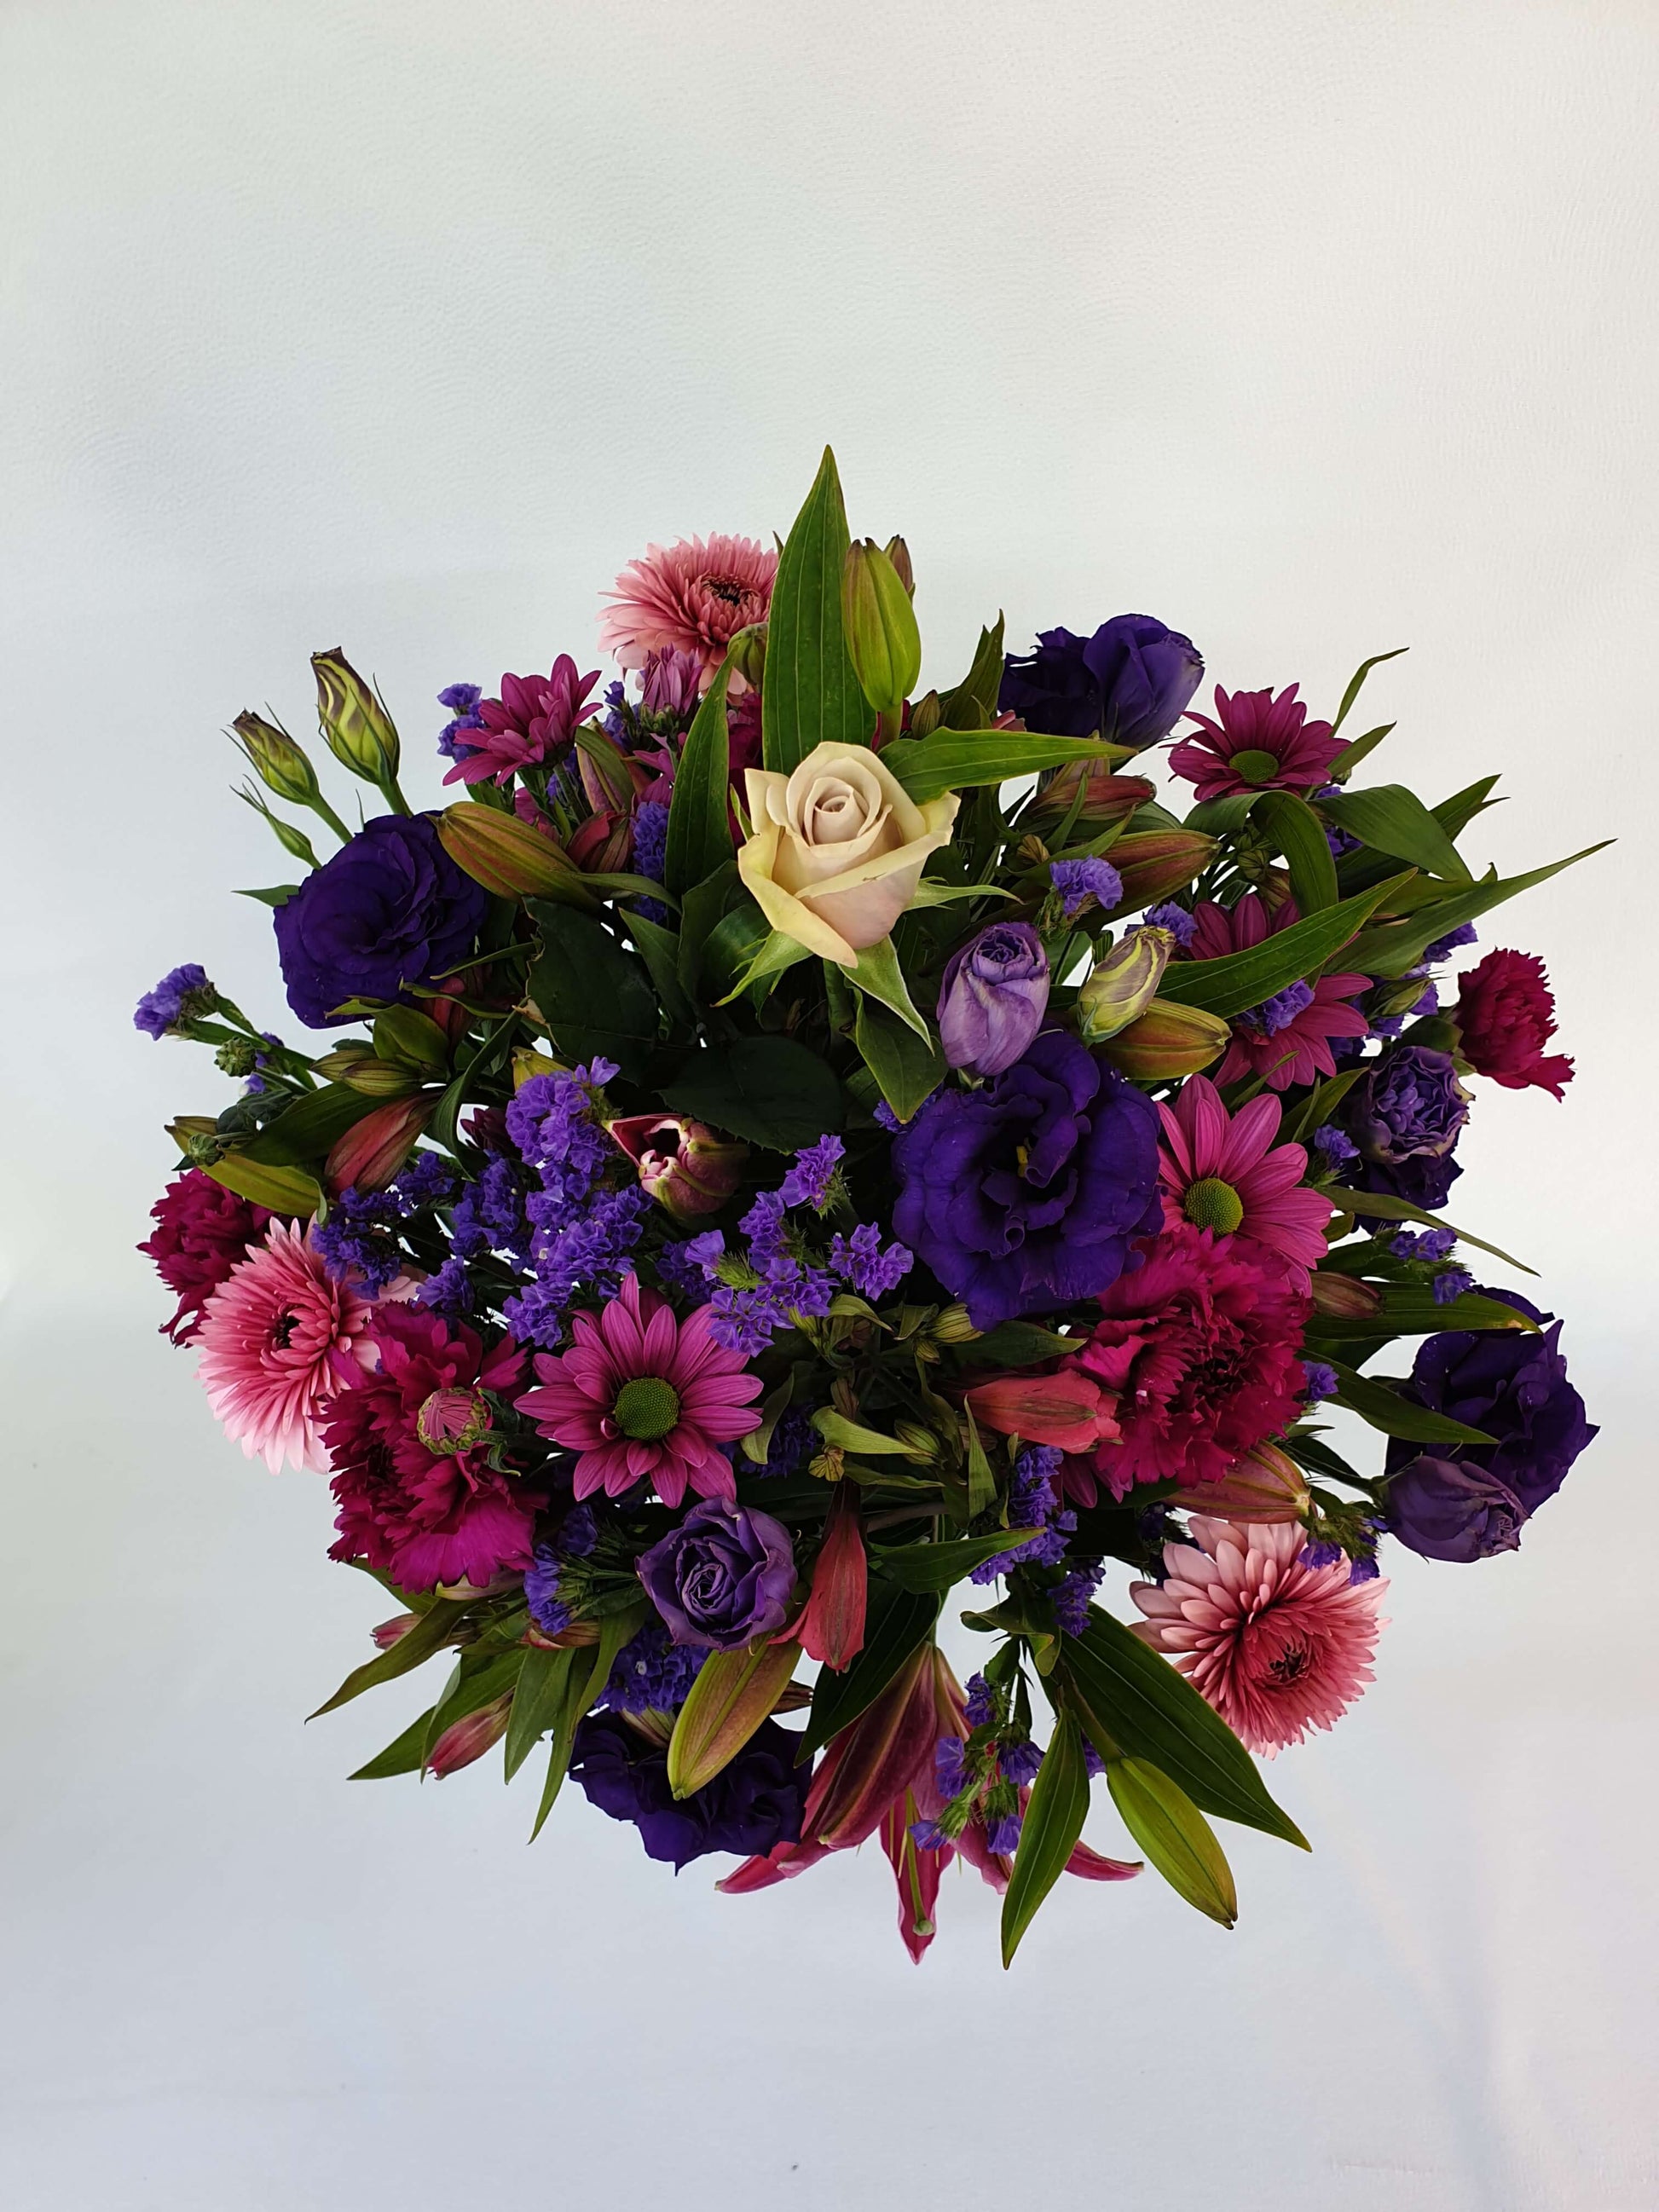 A pink and purple bouquet from above.